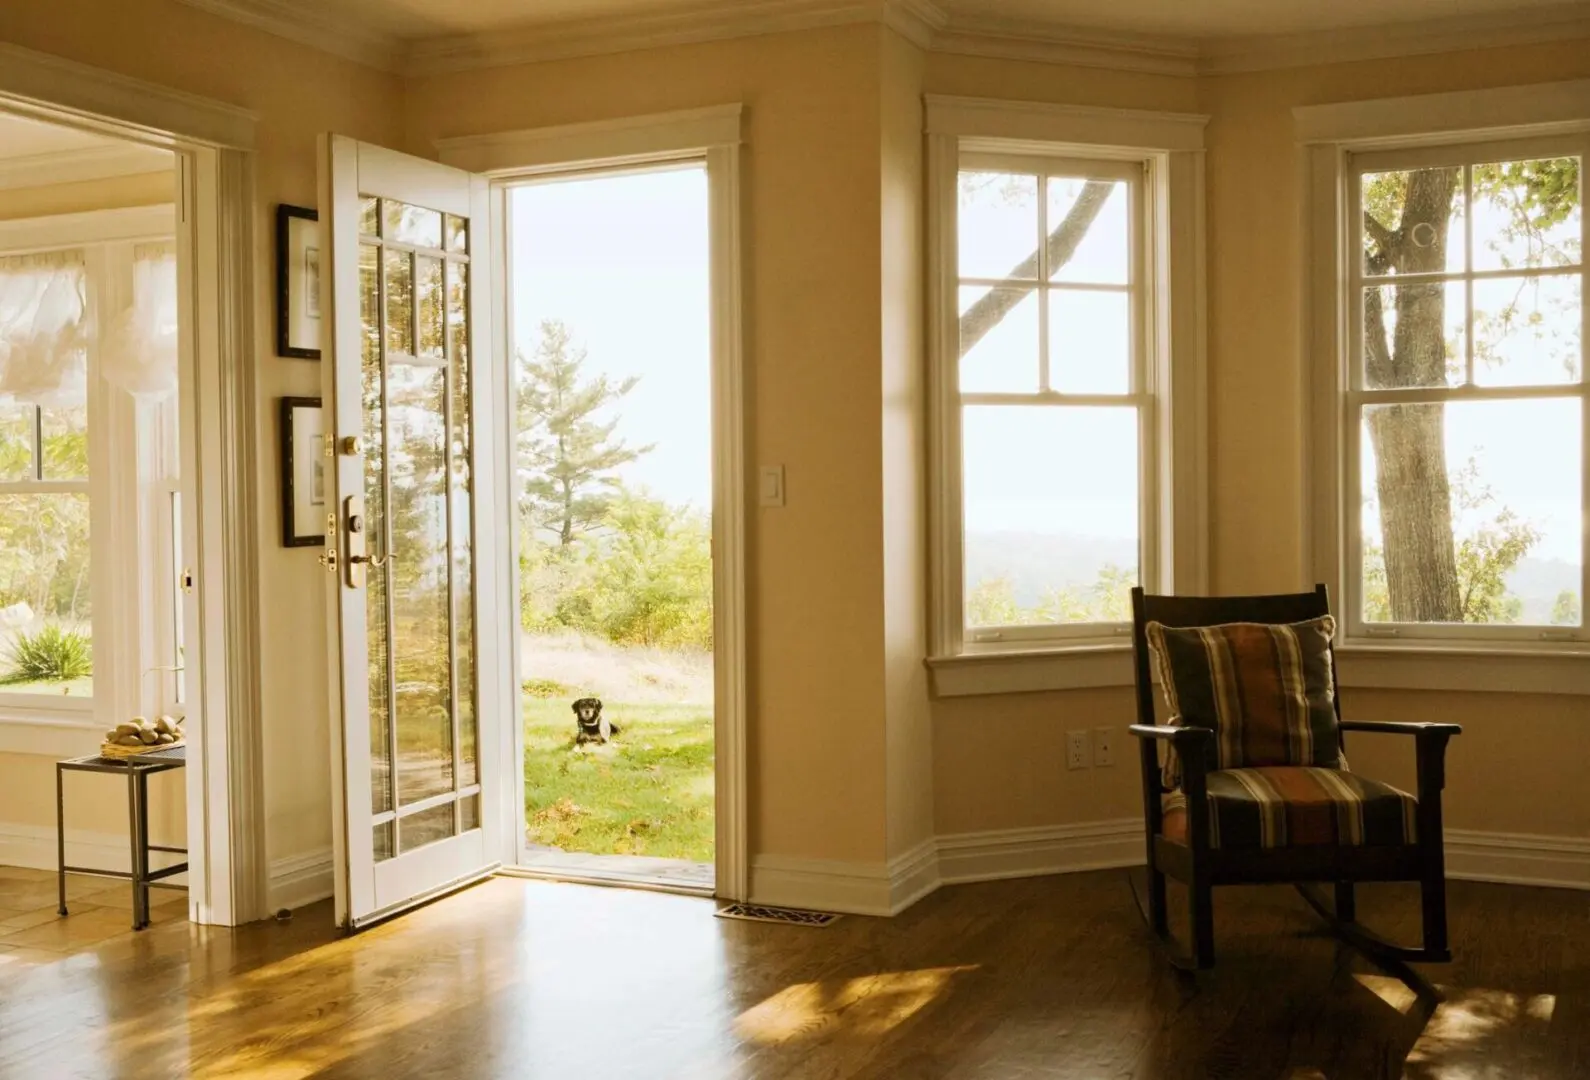 Welcome to Timeless Windows. We are specialist providers and installers of high quality wooden windows and doors.